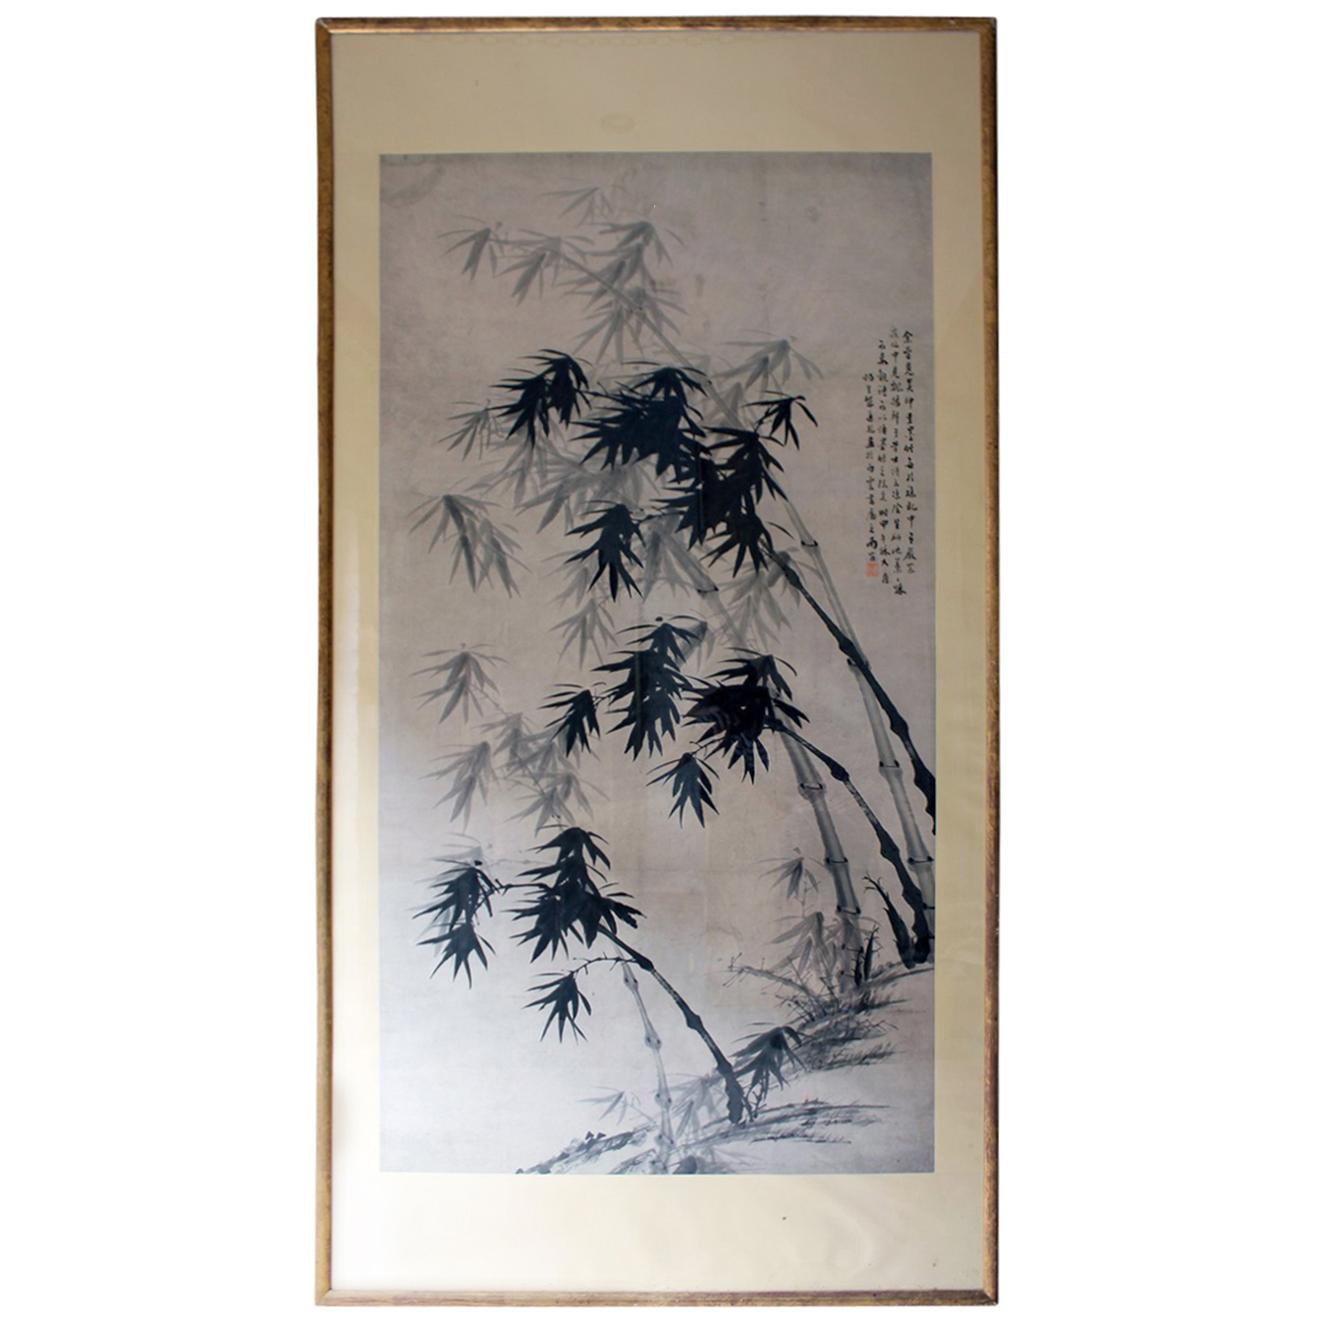 After 董其昌 Dong Qichang, Very Large Chinese Ink Painting of Bamboo, circa 1920-40